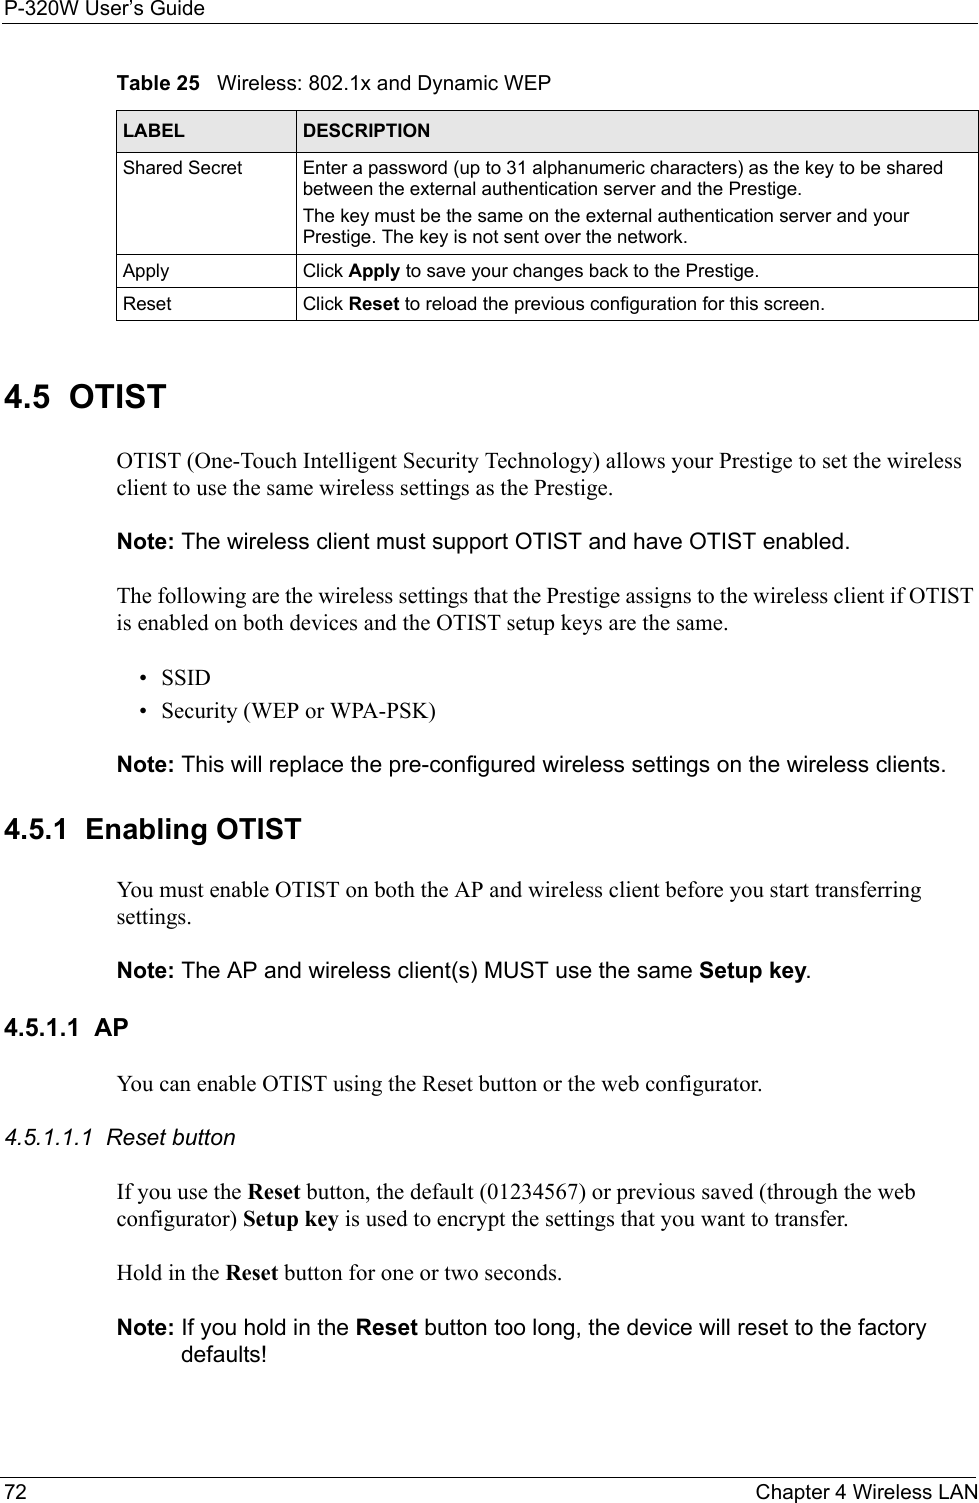 P-320W User’s Guide72  Chapter 4 Wireless LAN4.5  OTISTOTIST (One-Touch Intelligent Security Technology) allows your Prestige to set the wireless client to use the same wireless settings as the Prestige. Note: The wireless client must support OTIST and have OTIST enabled. The following are the wireless settings that the Prestige assigns to the wireless client if OTIST is enabled on both devices and the OTIST setup keys are the same. •SSID • Security (WEP or WPA-PSK) Note: This will replace the pre-configured wireless settings on the wireless clients.4.5.1  Enabling OTISTYou must enable OTIST on both the AP and wireless client before you start transferring settings.Note: The AP and wireless client(s) MUST use the same Setup key.4.5.1.1  APYou can enable OTIST using the Reset button or the web configurator. 4.5.1.1.1  Reset buttonIf you use the Reset button, the default (01234567) or previous saved (through the web configurator) Setup key is used to encrypt the settings that you want to transfer. Hold in the Reset button for one or two seconds. Note: If you hold in the Reset button too long, the device will reset to the factory defaults!Shared Secret Enter a password (up to 31 alphanumeric characters) as the key to be shared between the external authentication server and the Prestige.The key must be the same on the external authentication server and your Prestige. The key is not sent over the network. Apply Click Apply to save your changes back to the Prestige.Reset Click Reset to reload the previous configuration for this screen.Table 25   Wireless: 802.1x and Dynamic WEPLABEL DESCRIPTION